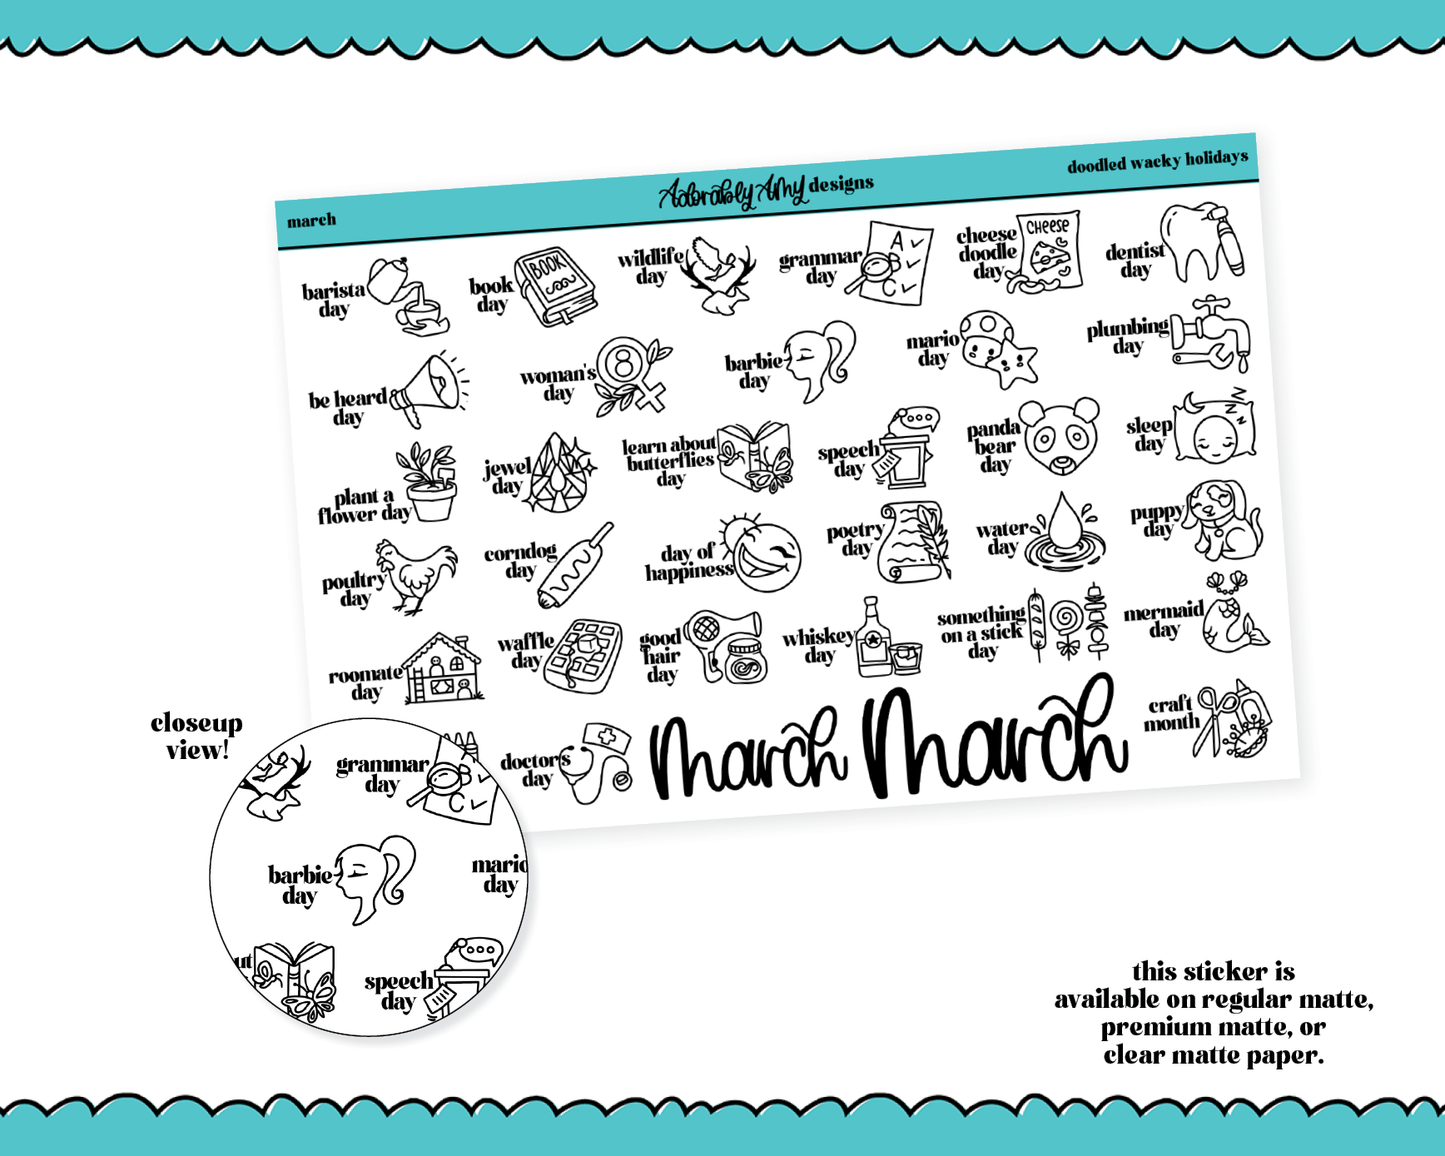 March Doodled Wacky Holidays Reminder Tracker Stickers for any Planner or Insert